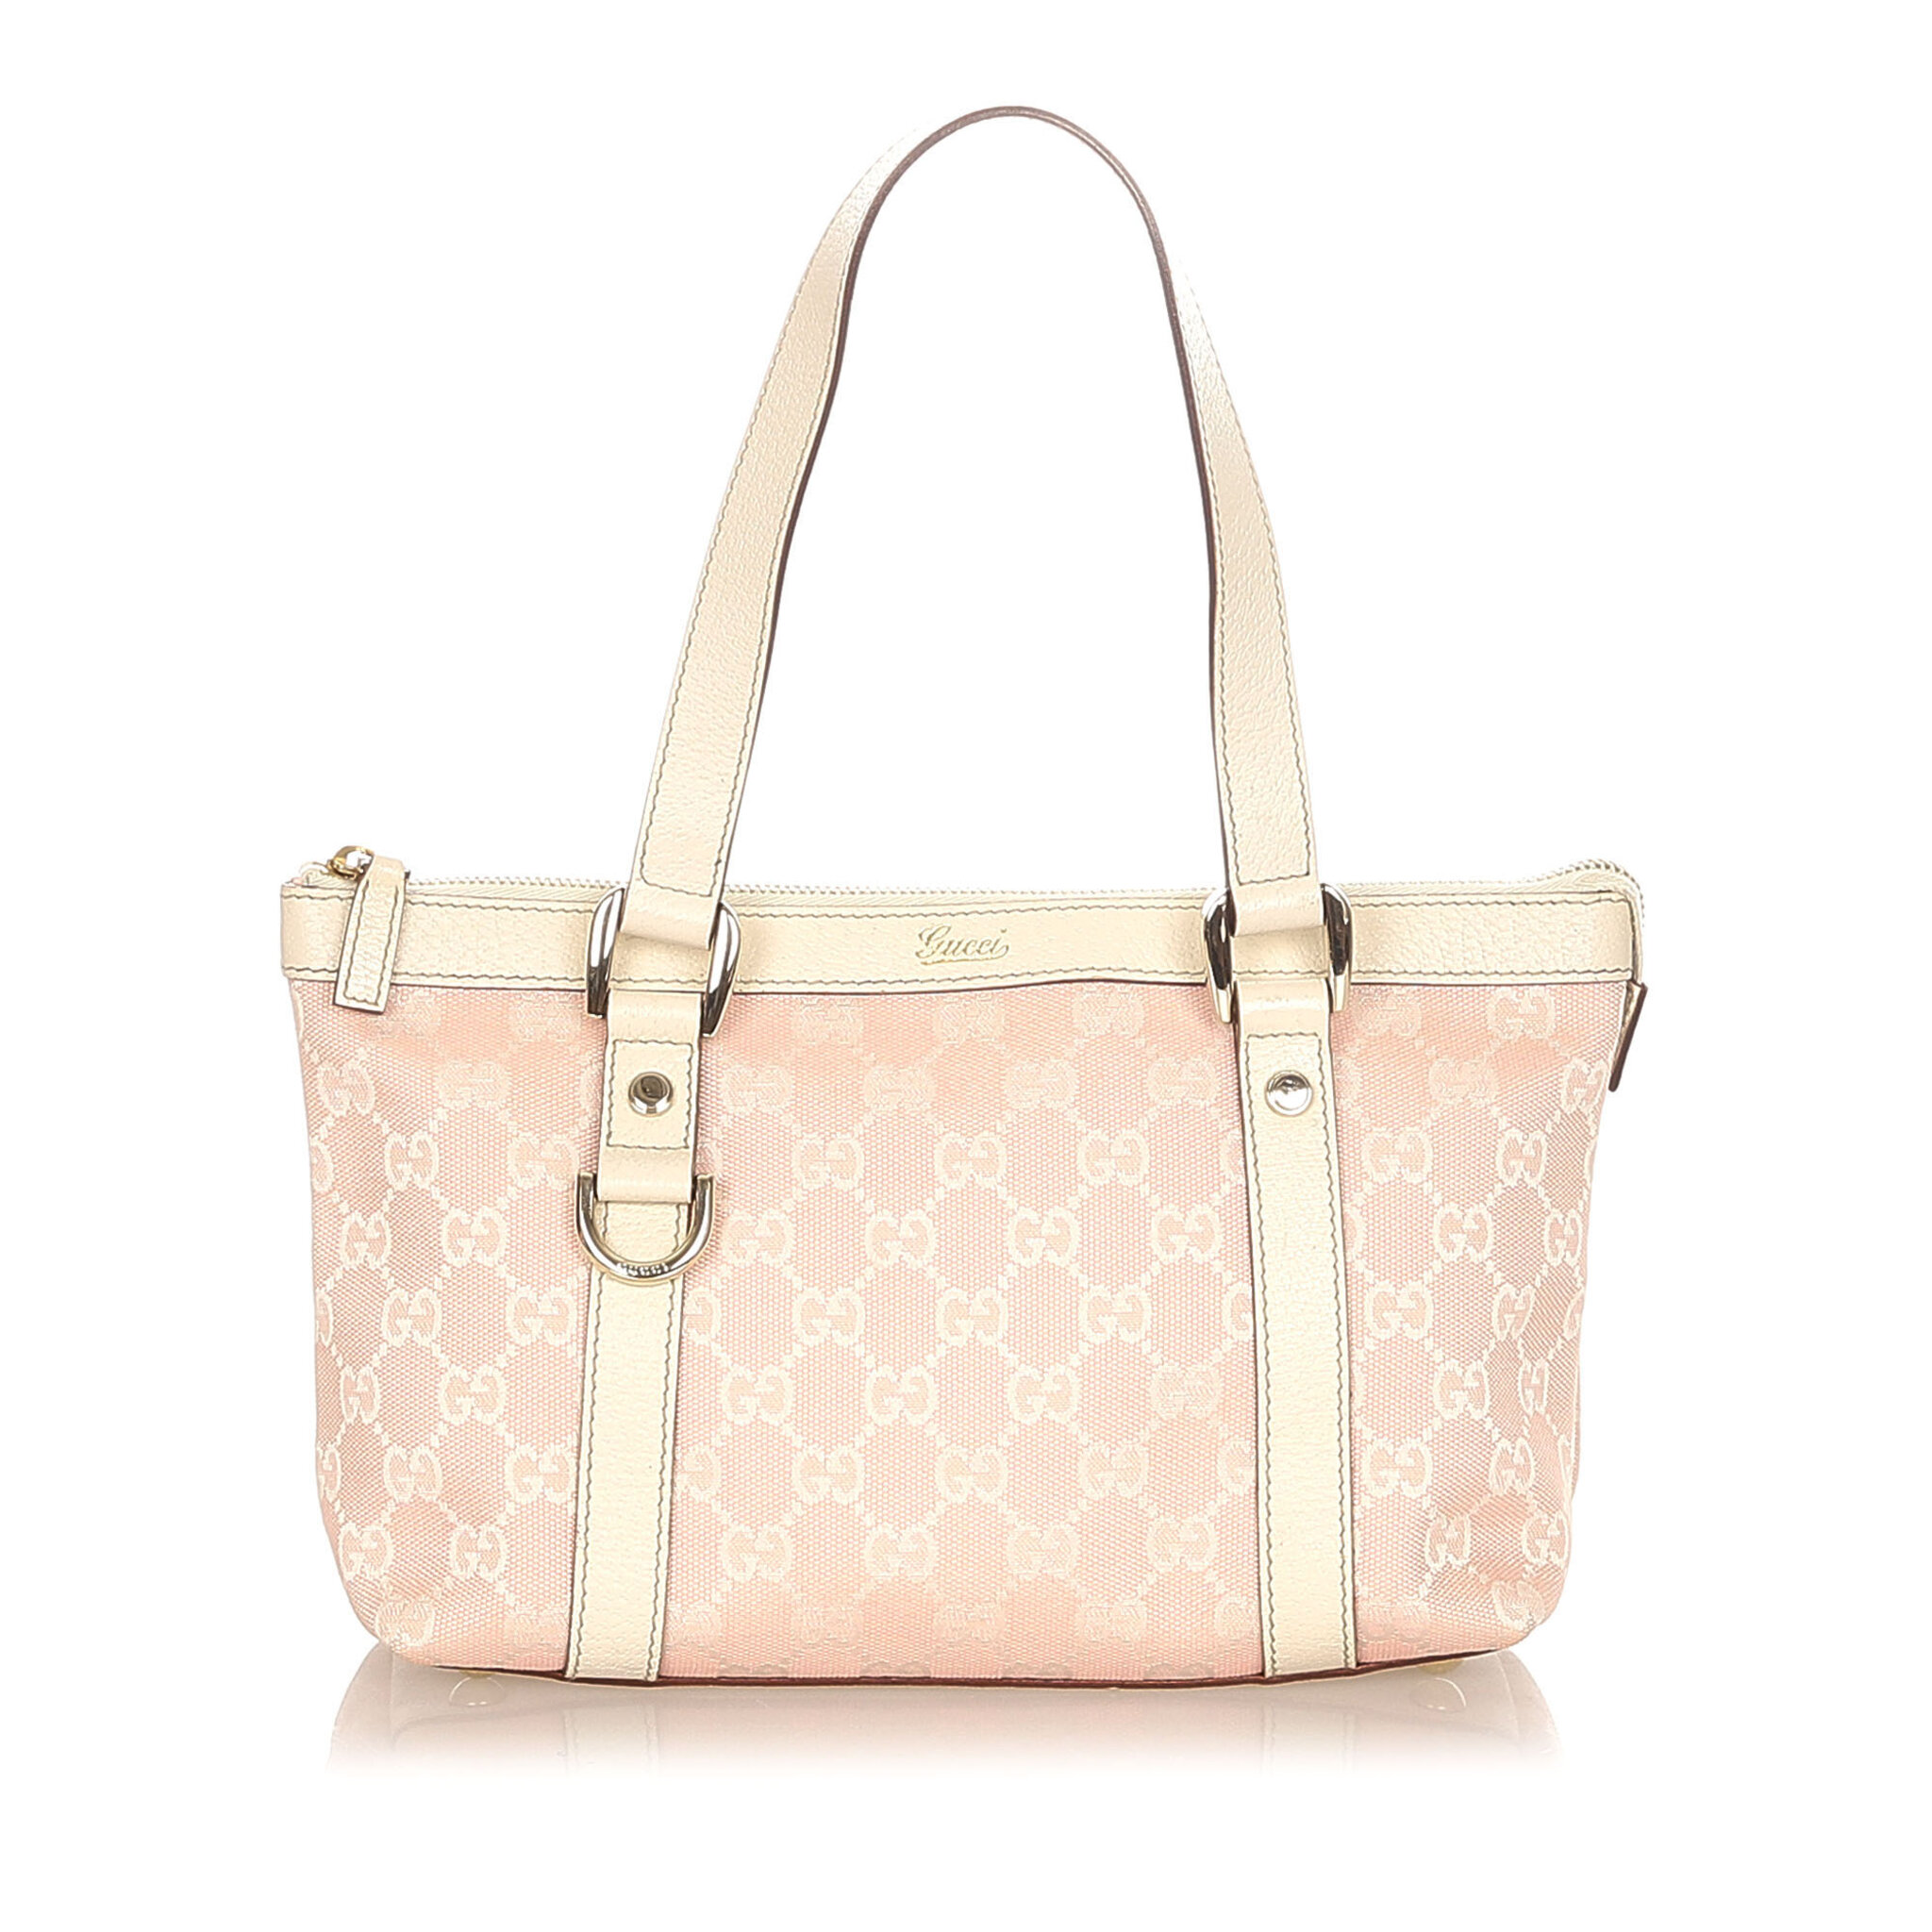 Gucci Gg Canvas Abbey Tote Bag, pink